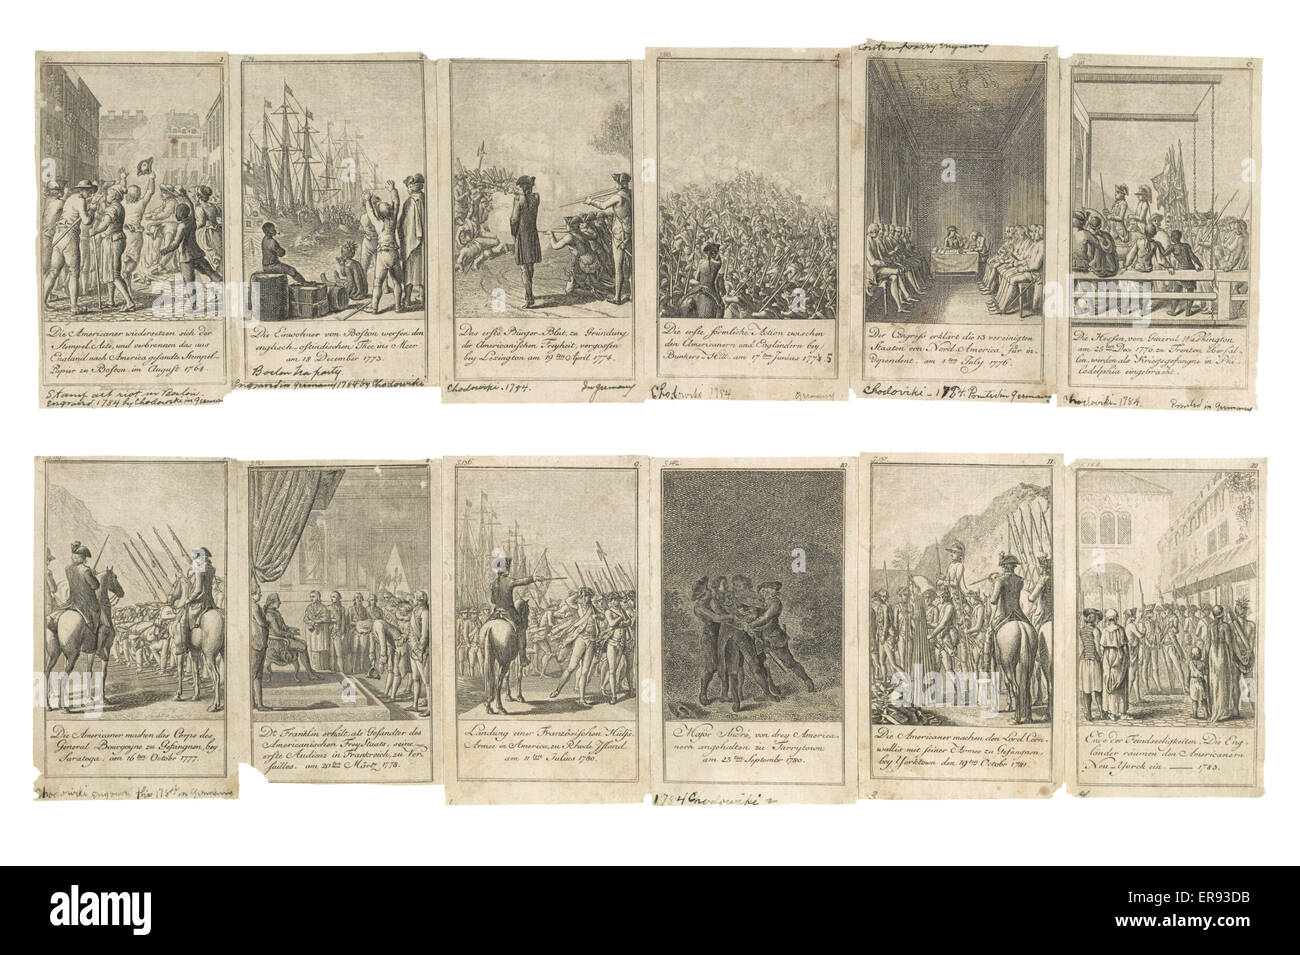 Scenes from events and battles leading up to and during the American Revolution, 1775-1783, as depicted in 12 illustrations. Date 1784. Stock Photo